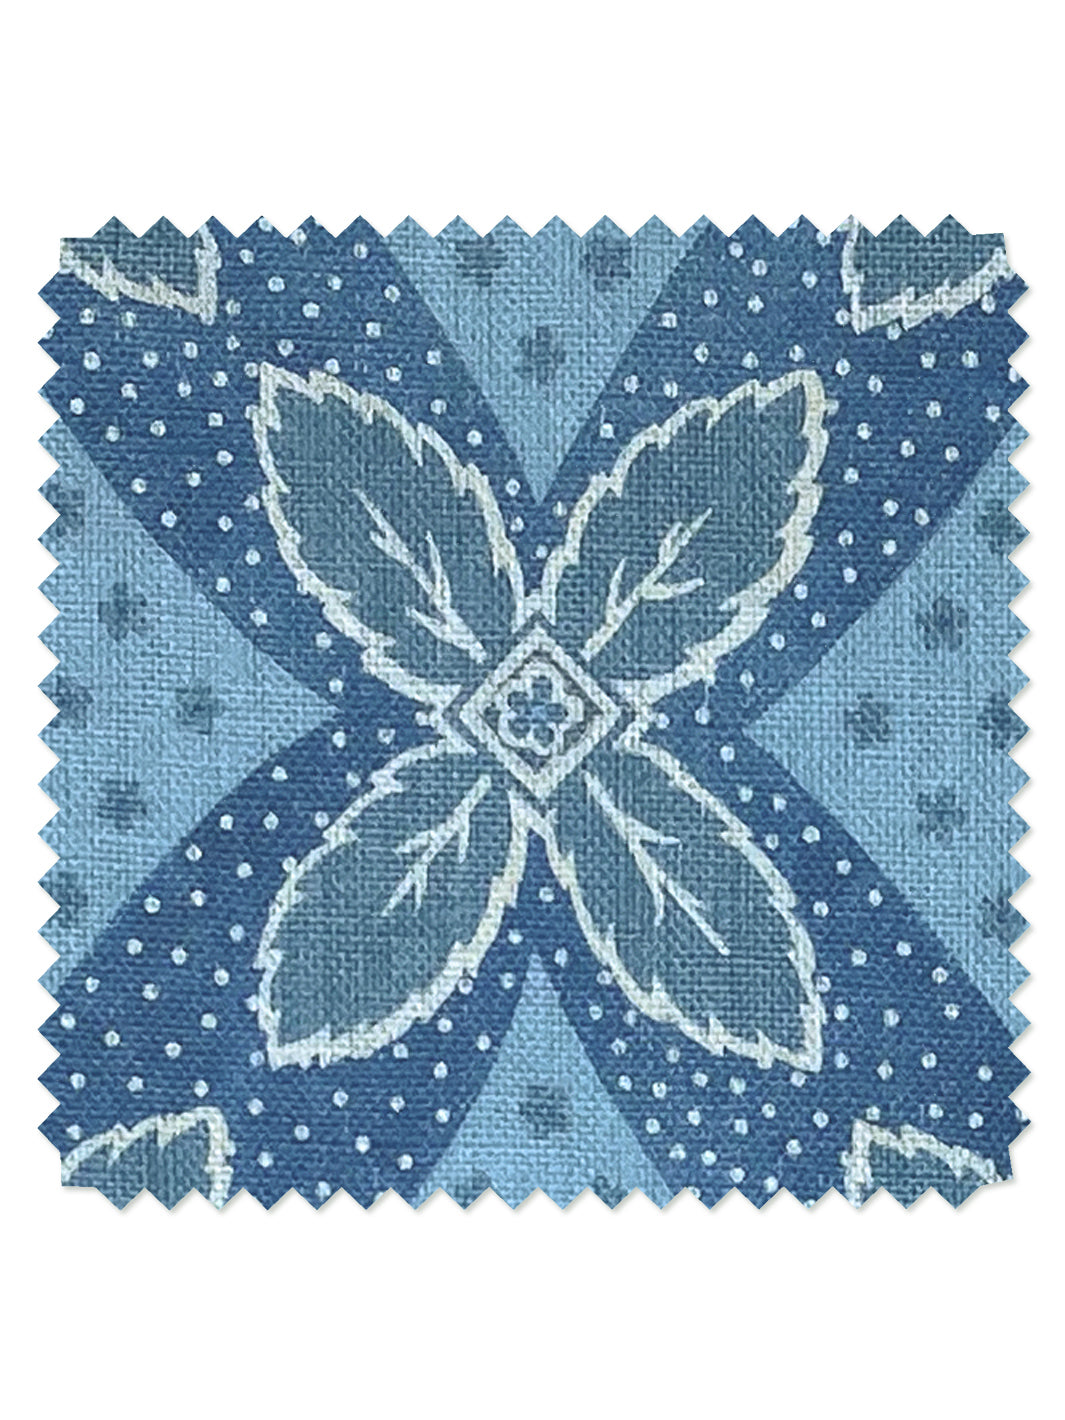 'Arthur' Linen Fabric by Nathan Turner - Blue on Blue